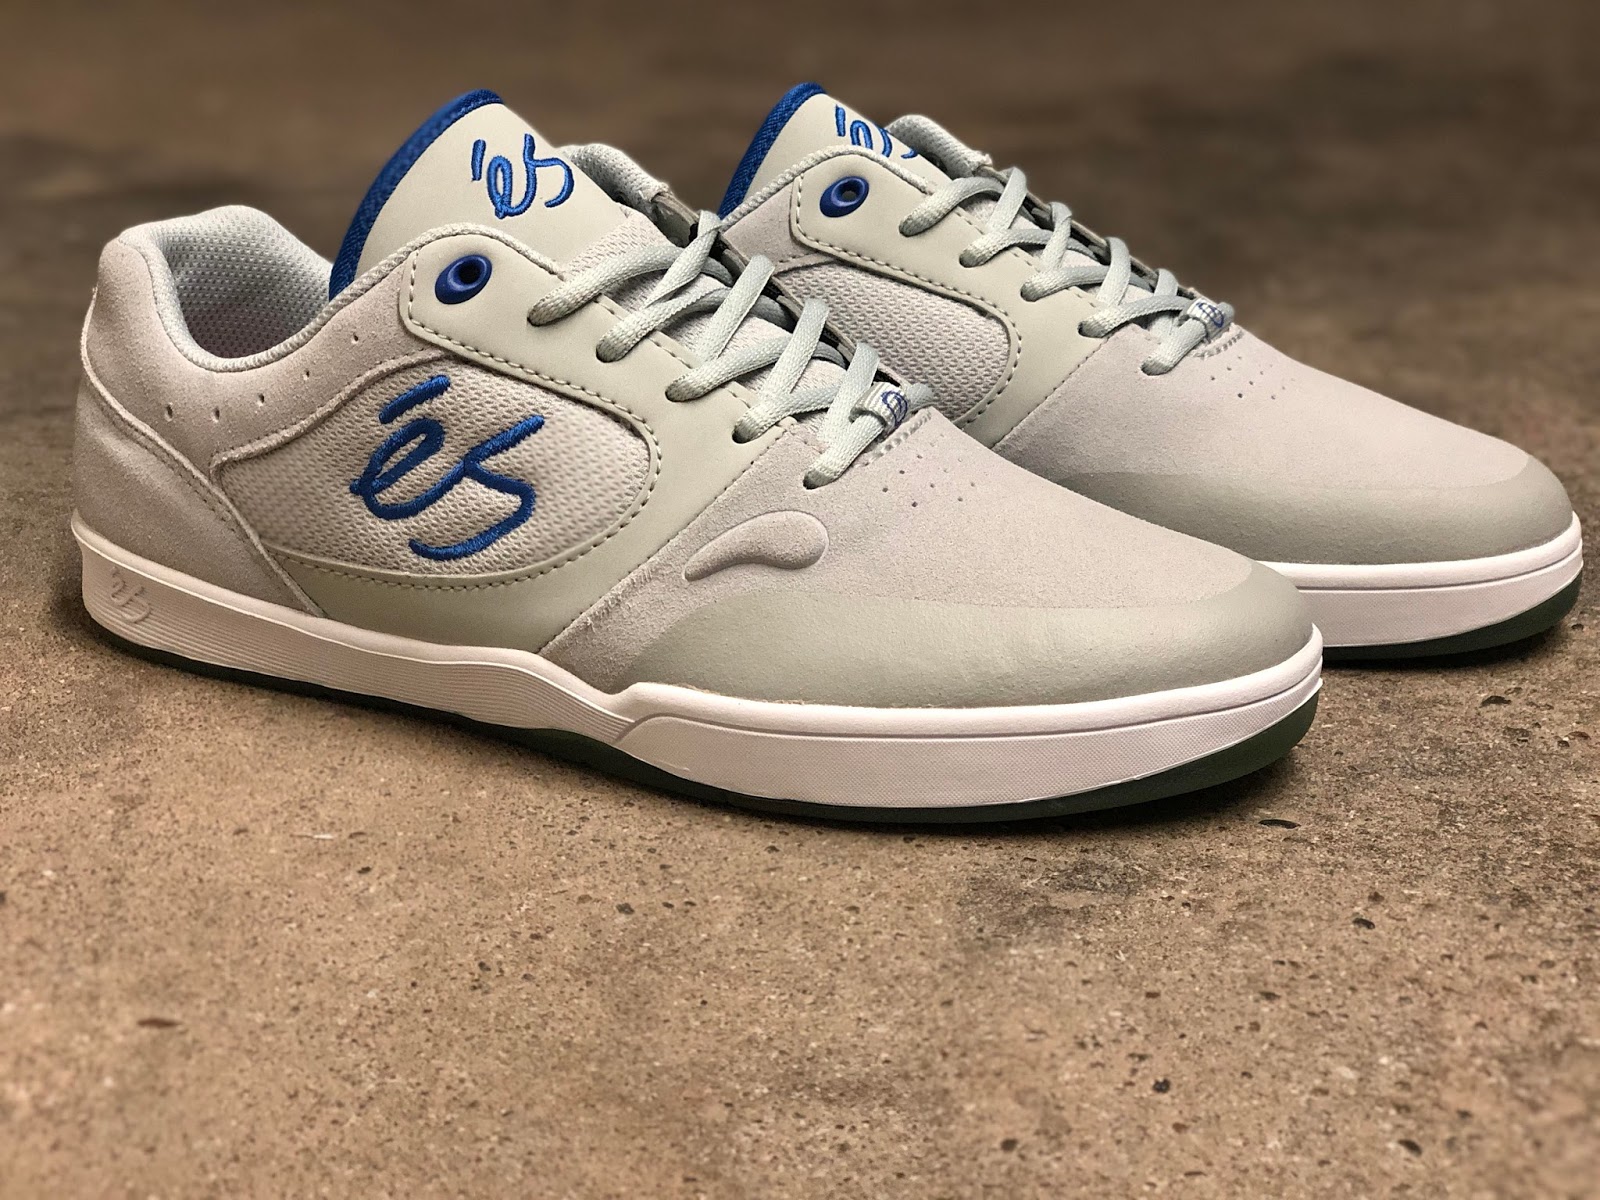 Damage Boardshop: Two New Shoes From ES